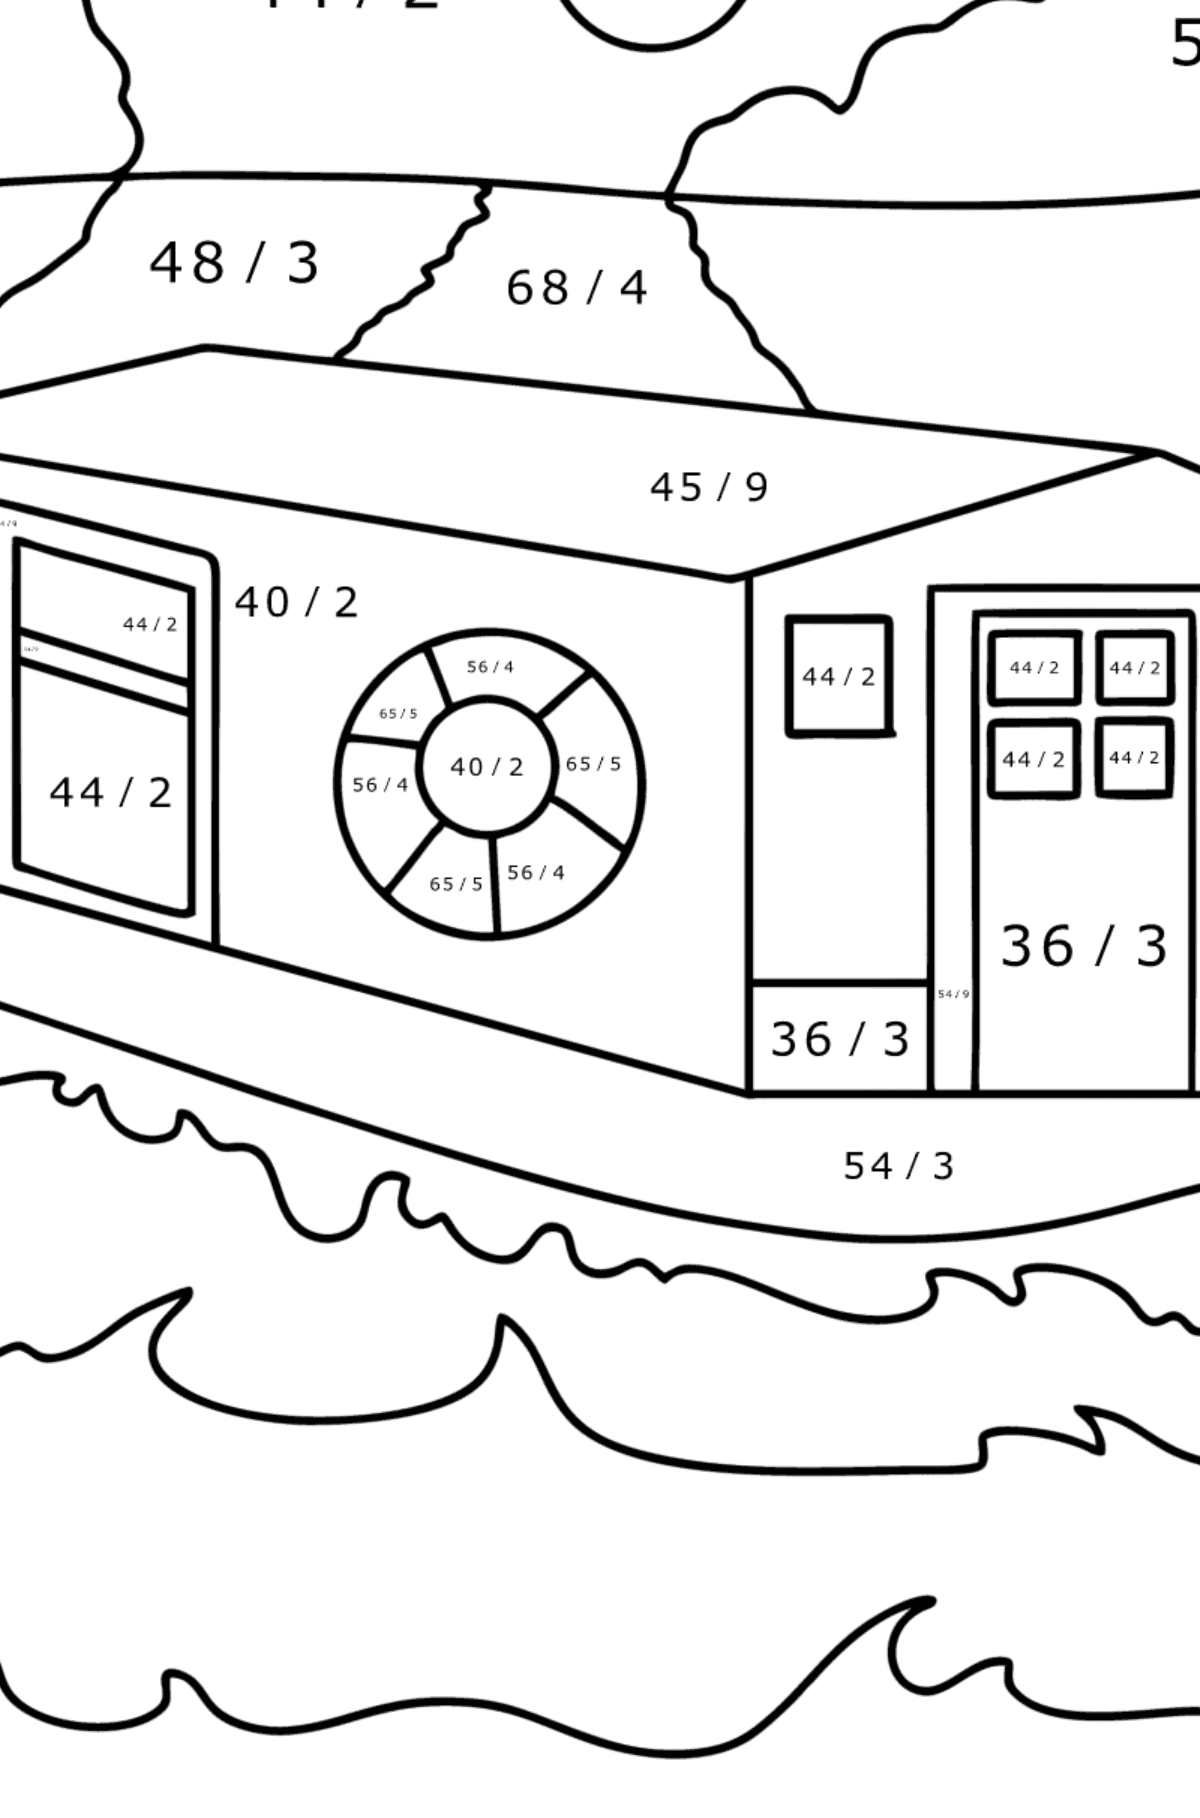 BoatHouse coloring page - Math Coloring - Division for Kids